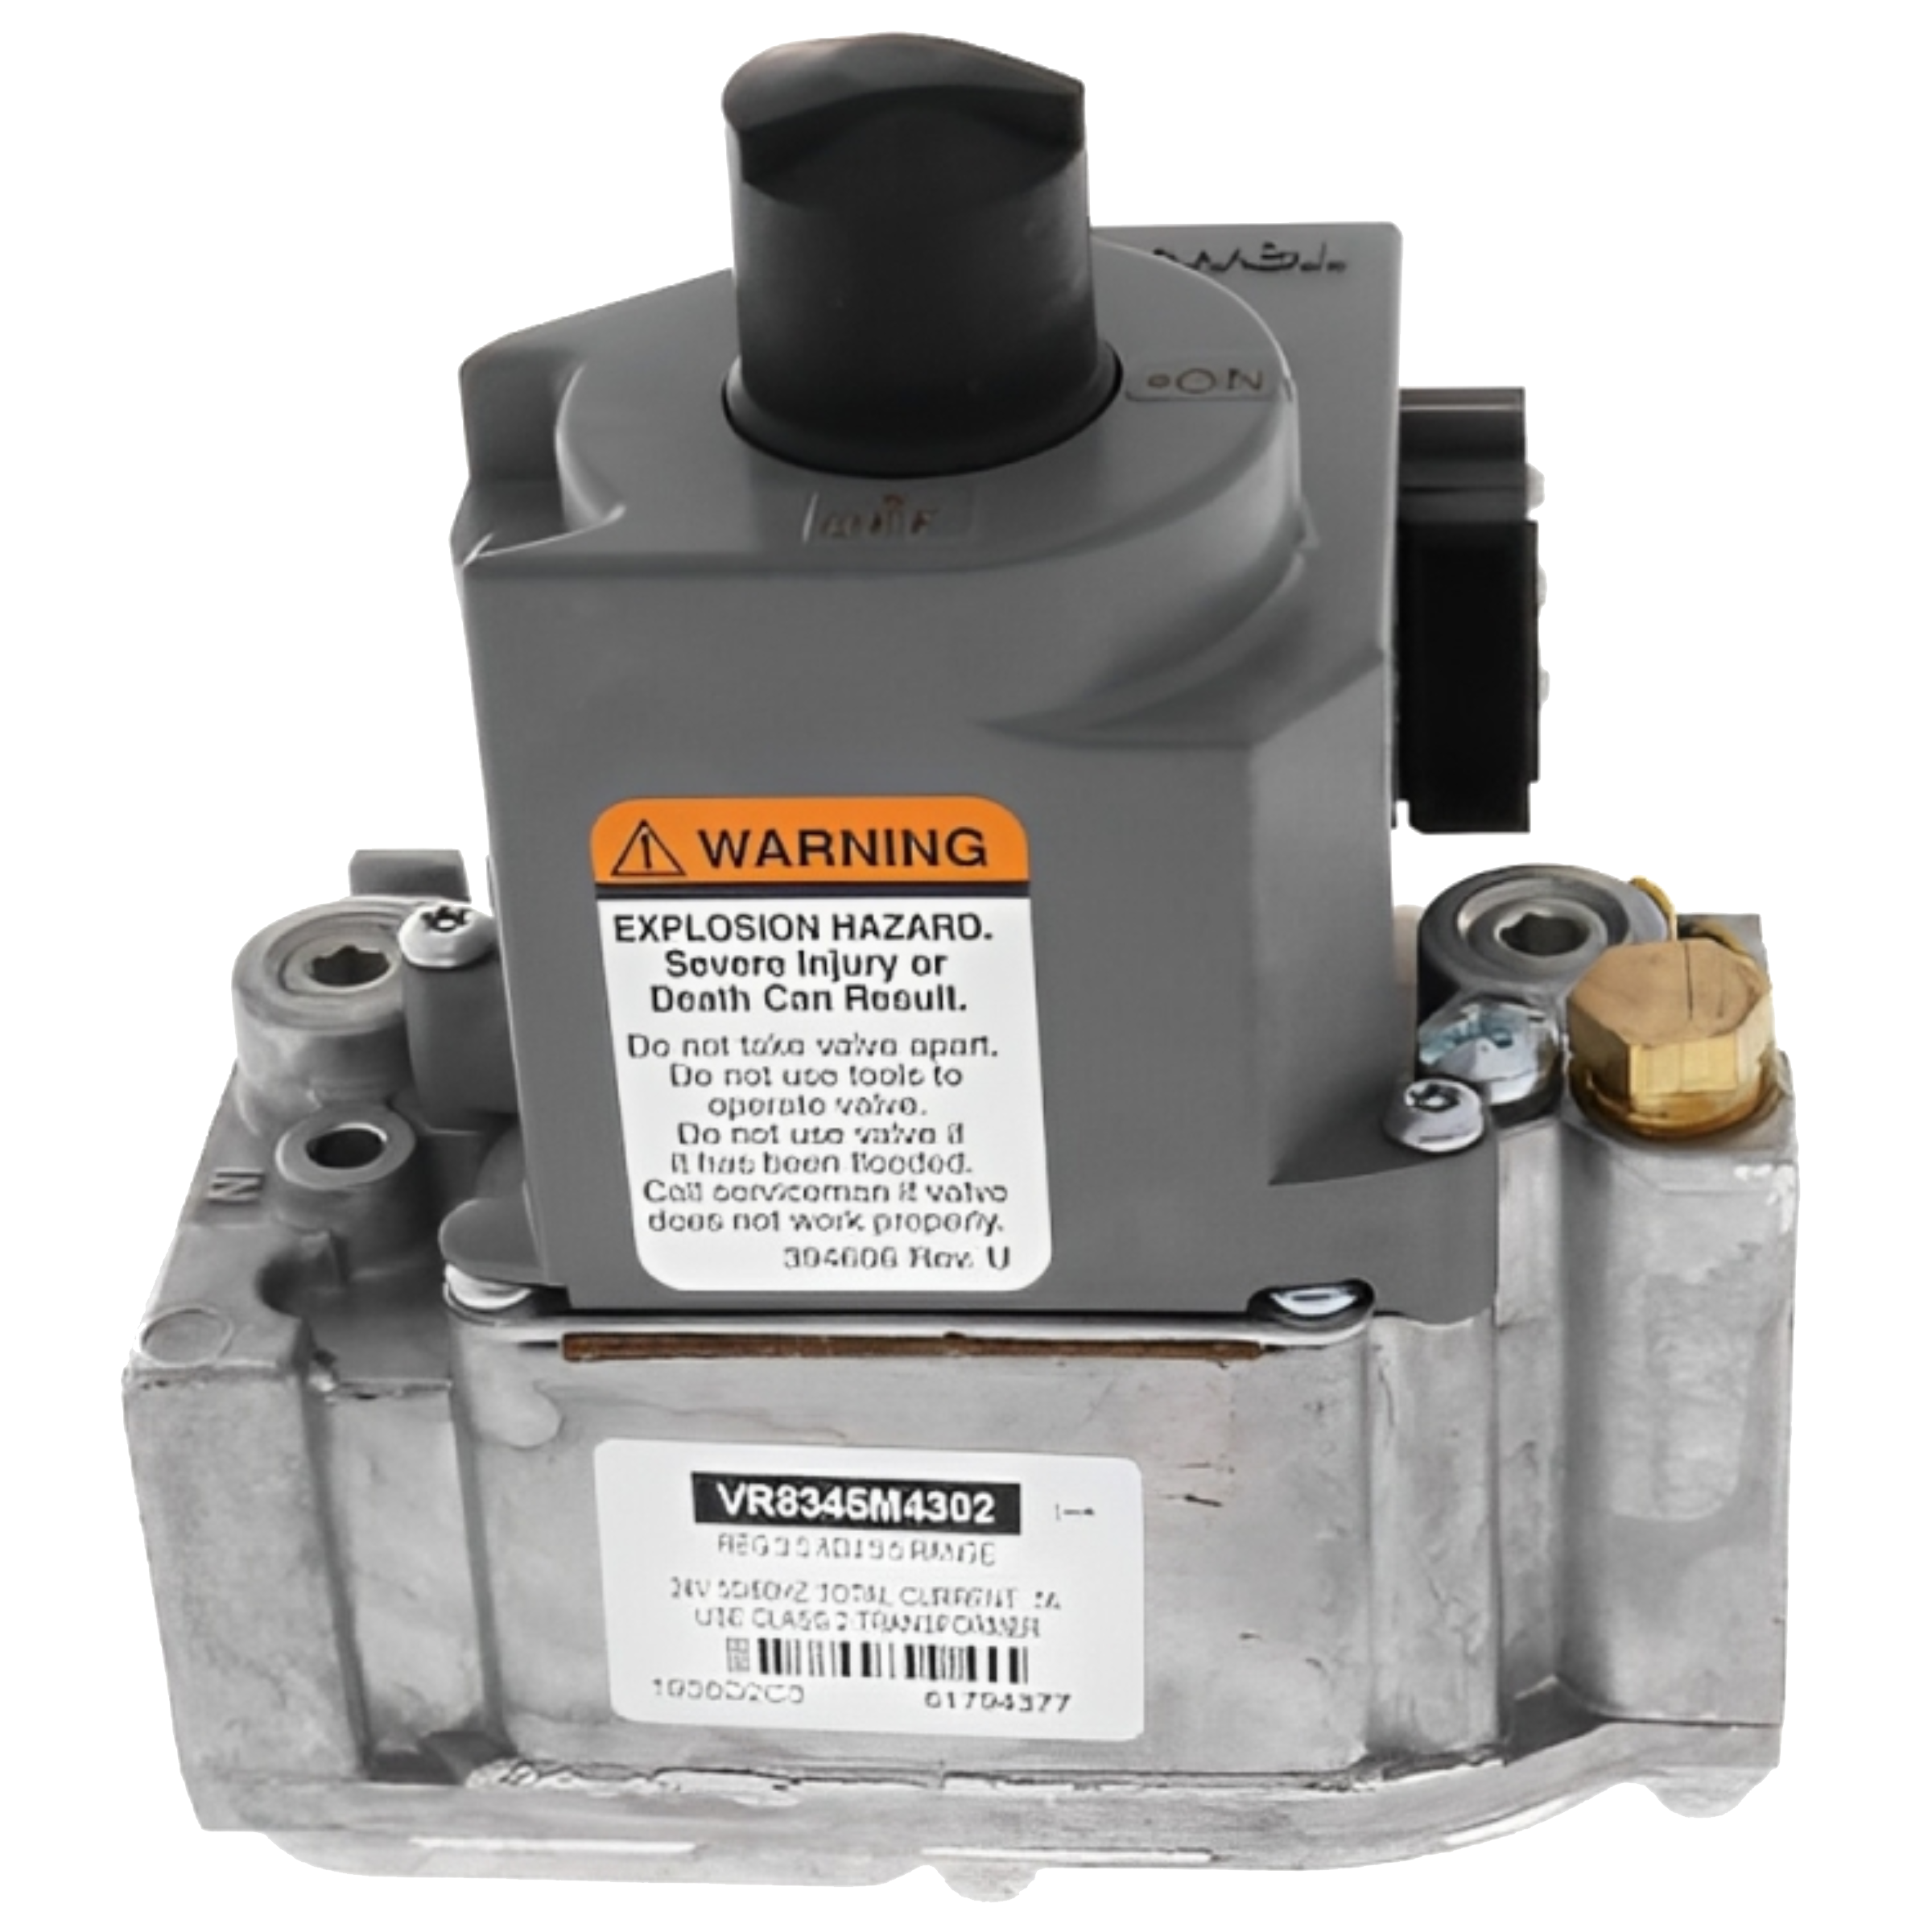 VR8345M4302 Honeywell Home Intermittent / Direct Ignition Gas Valve 24 Vac, Standard Opening, 3/4 in. x 3/4 in. 3.5 in. wc, Capacity 300,000 BTUh